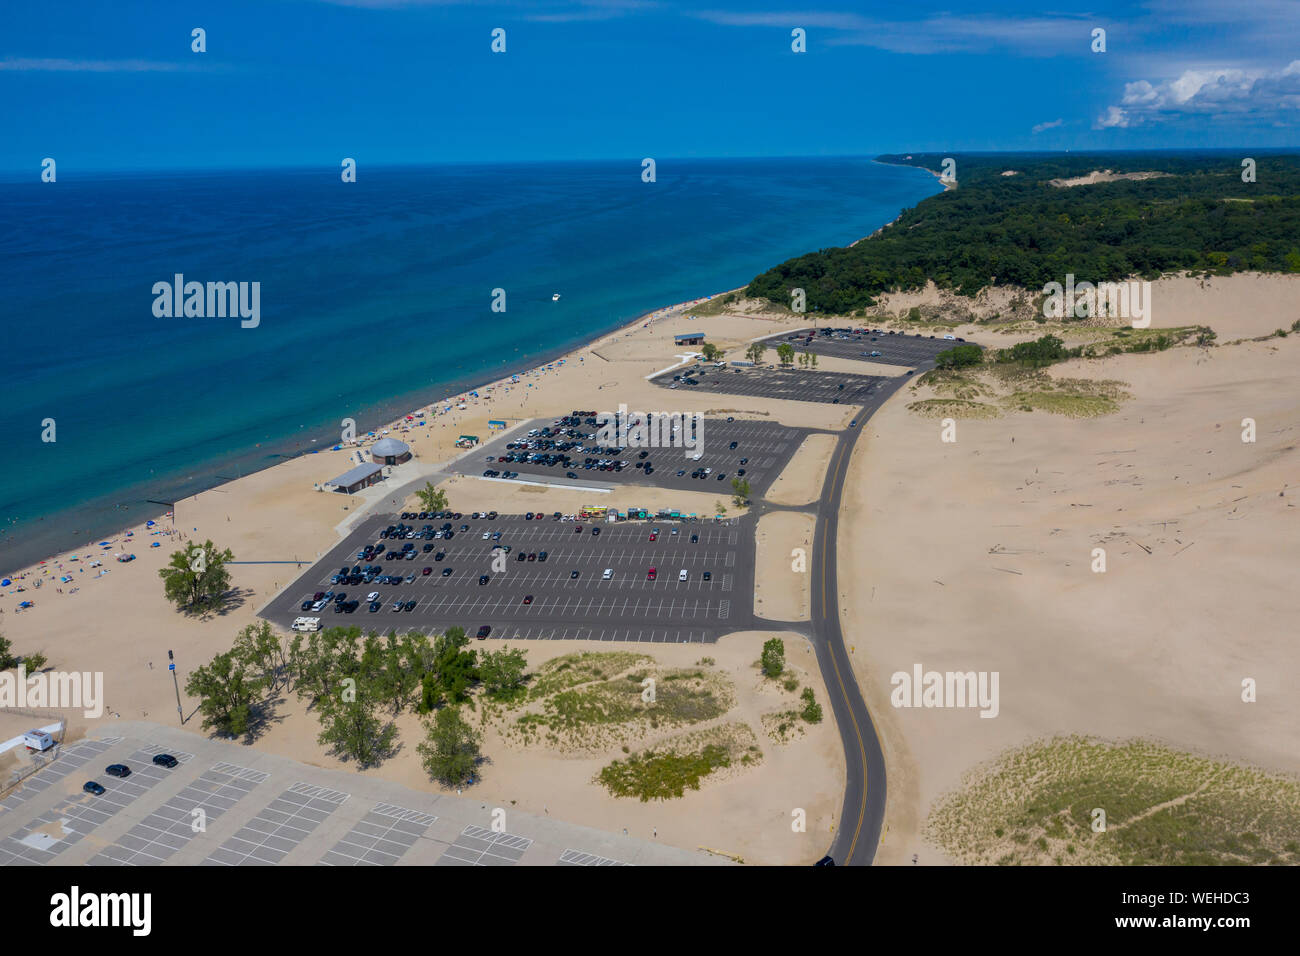 Sawyer, Michigan - The parking lots at the beach in Warren Dunes State Park on Lake Michigan. The park gets about a million visitors each year, making Stock Photo